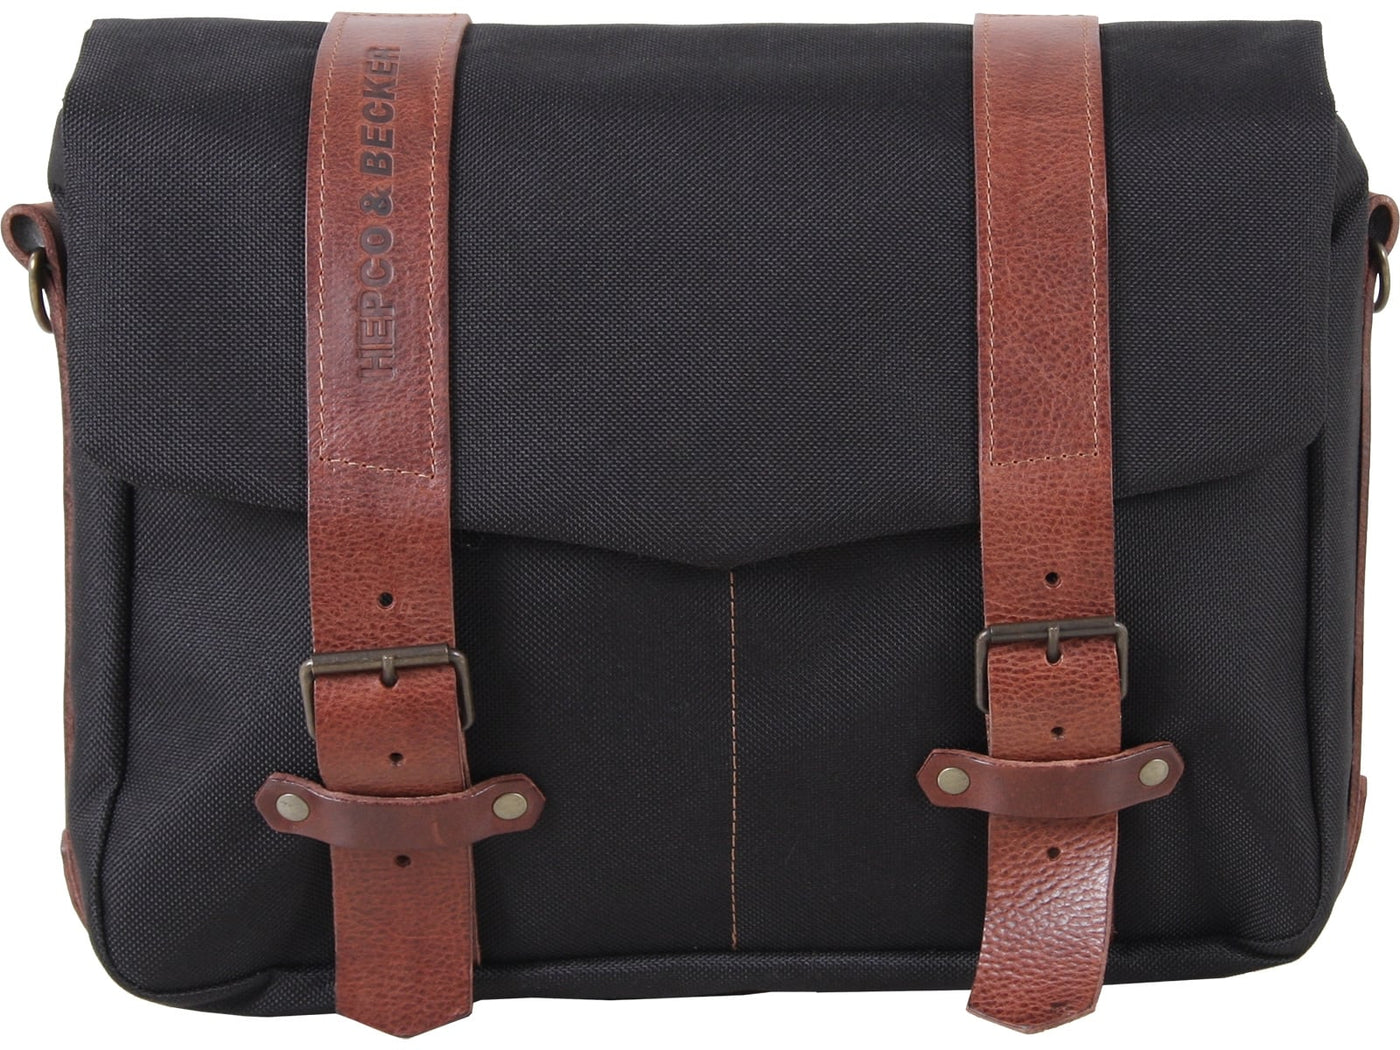 LEGACY Courier Bag in BLACK for C-Bow Carrier